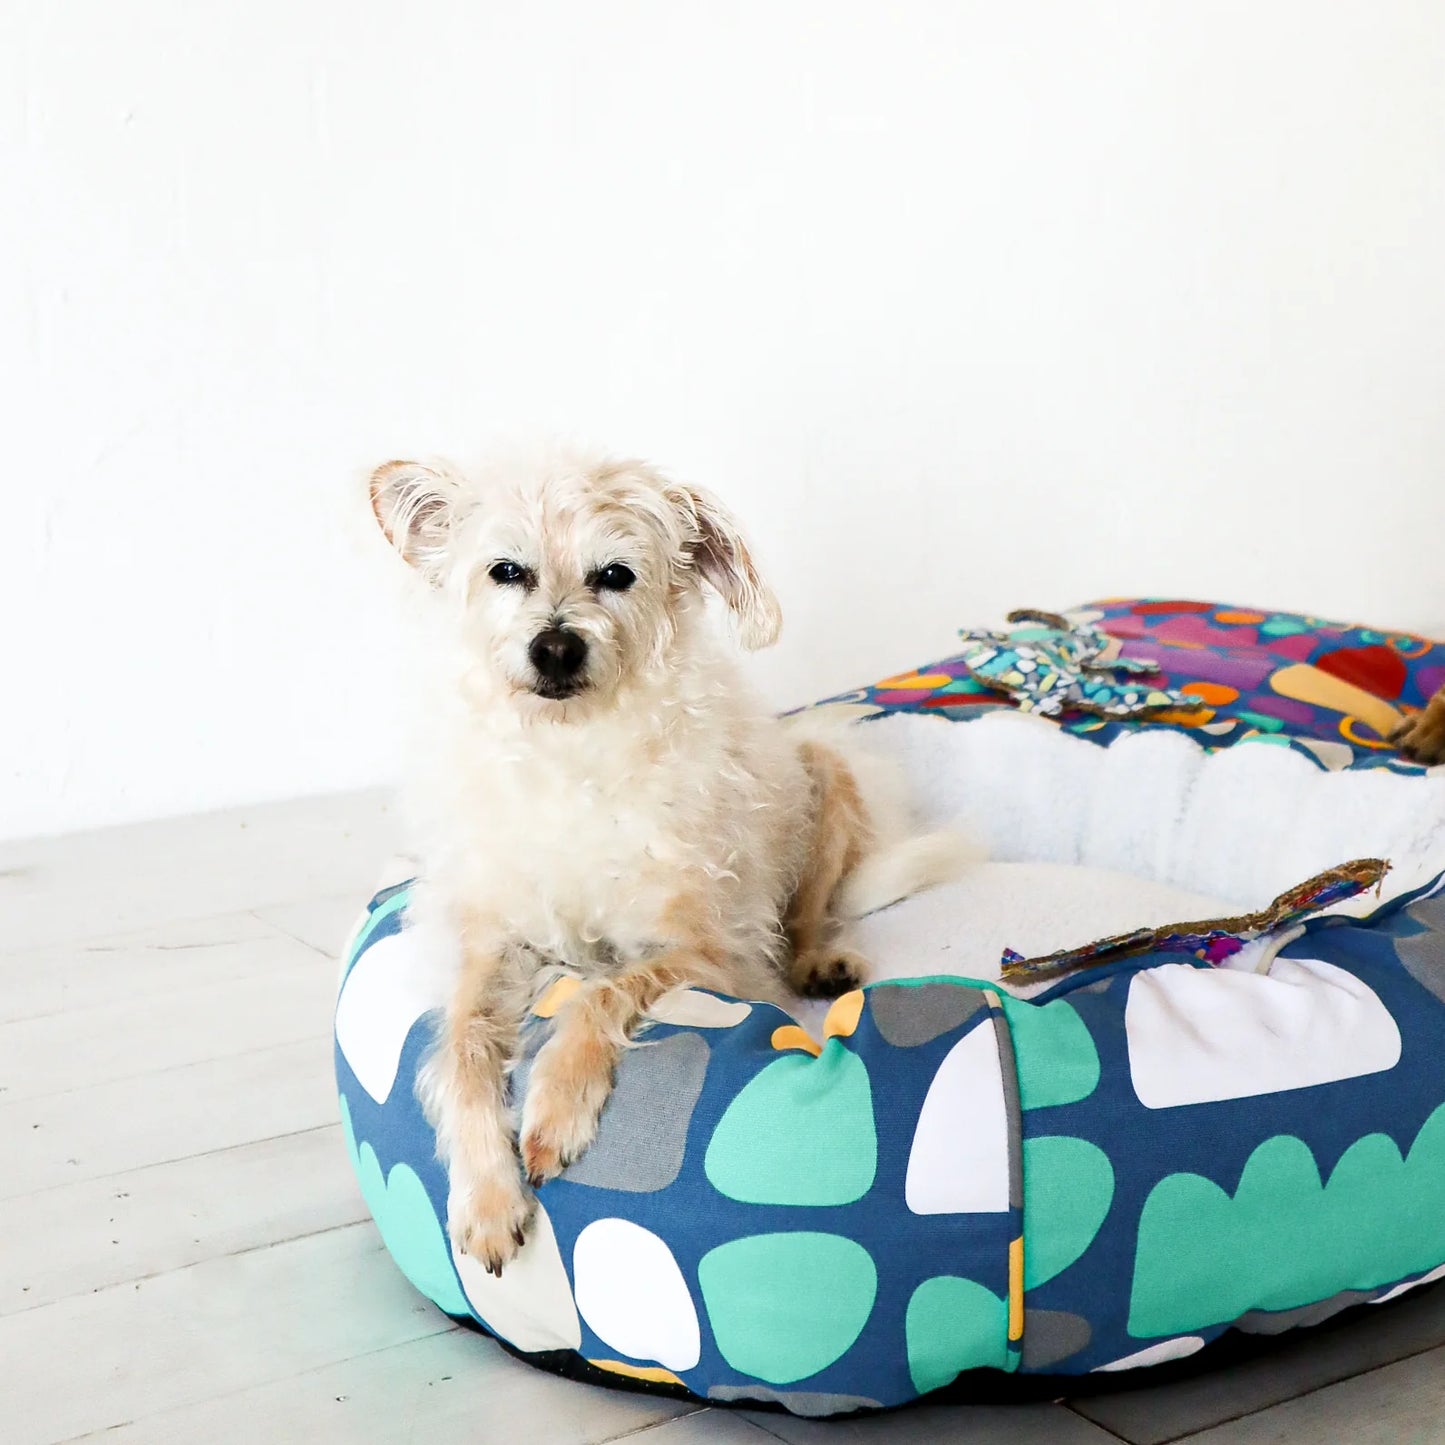 Outback Tails - Fleecy Round Dog Bed - Puli Puli Blue